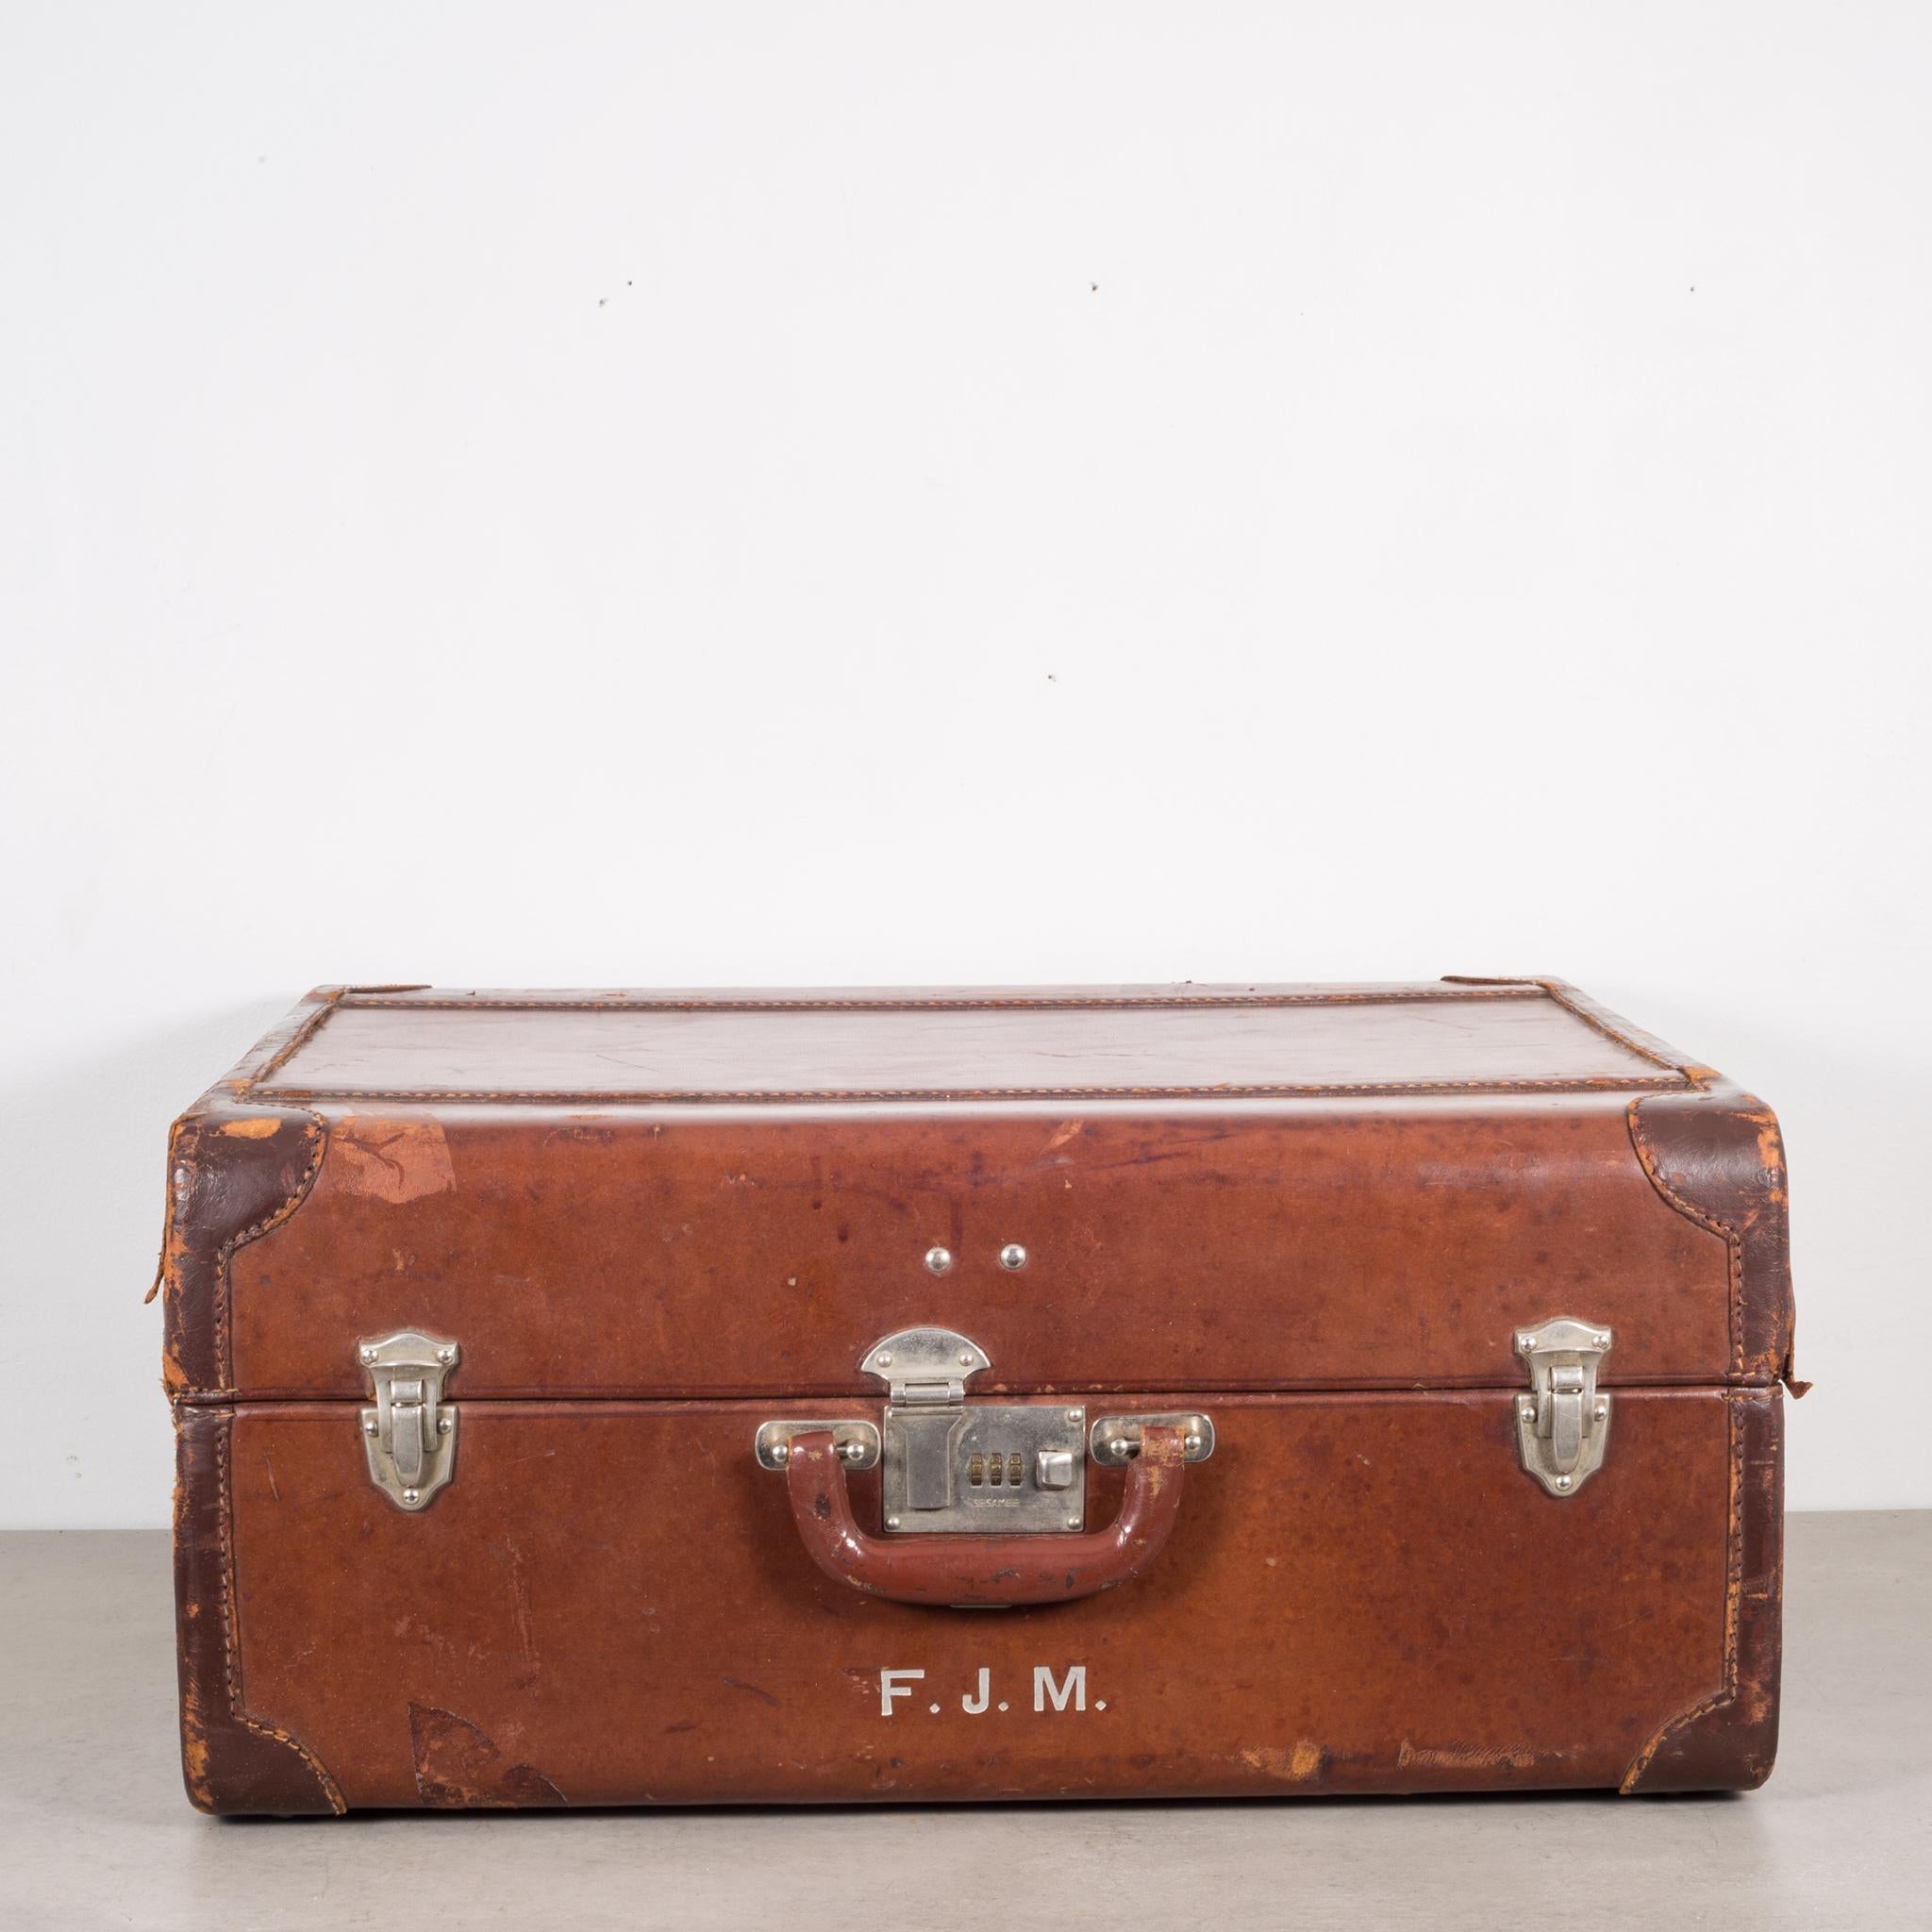 About

An all leather medium suitcase with stitched corners, silver locks and a leather handle cover. The luggage is monogrammed 